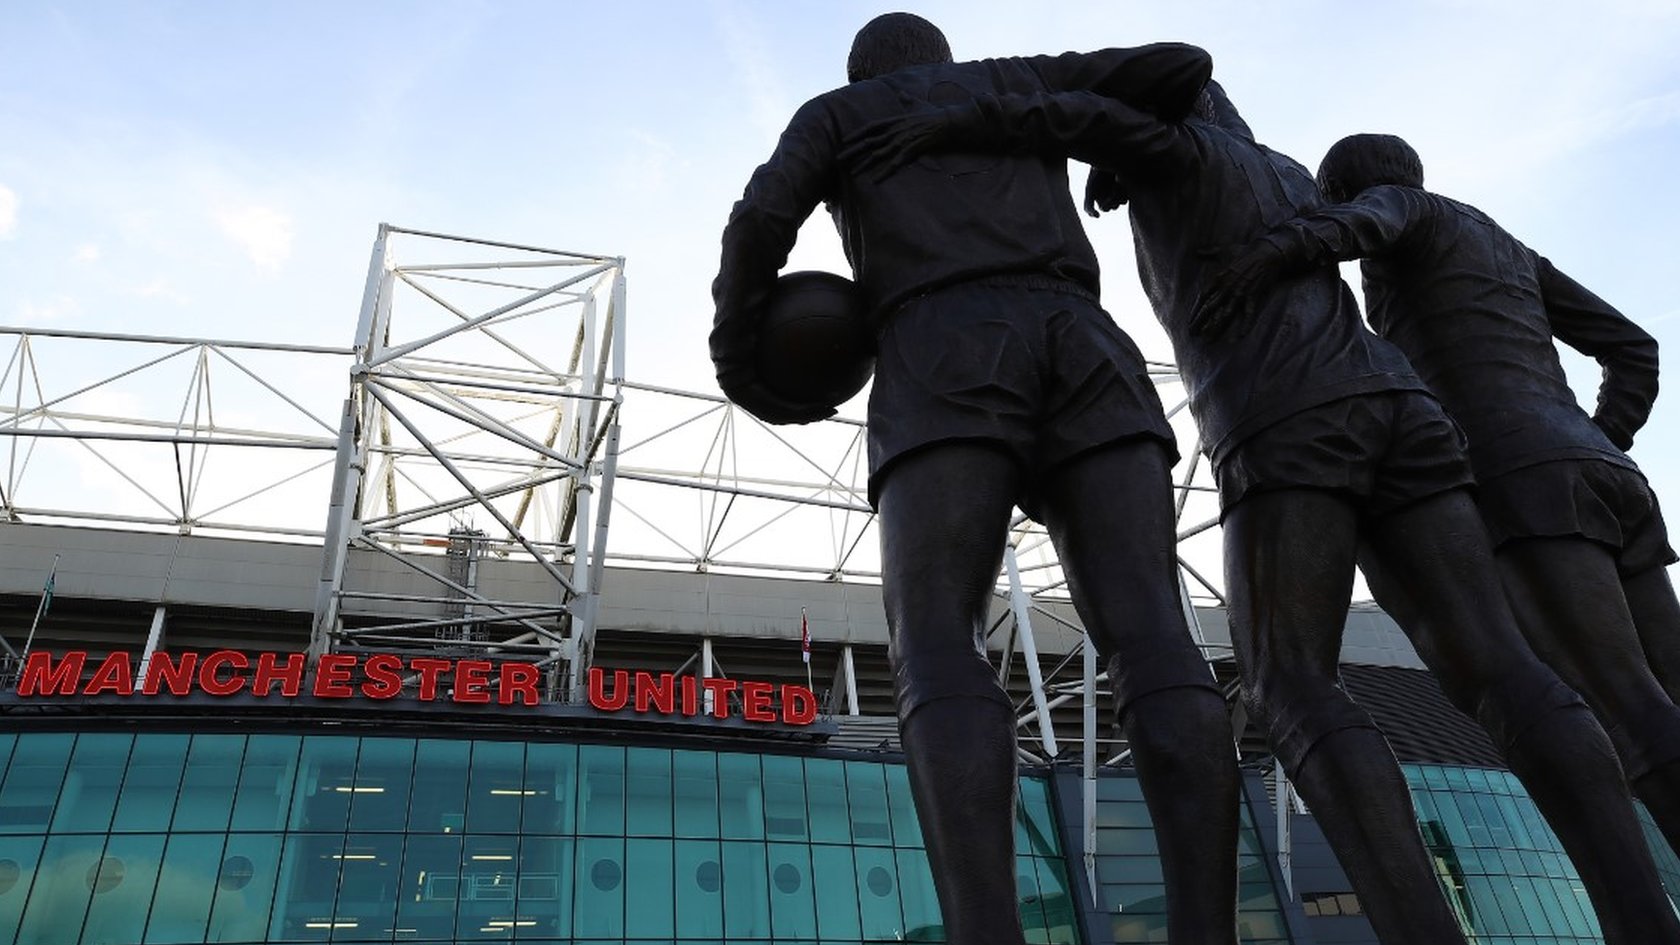 Manchester United most valuable club in Europe, says KPMG